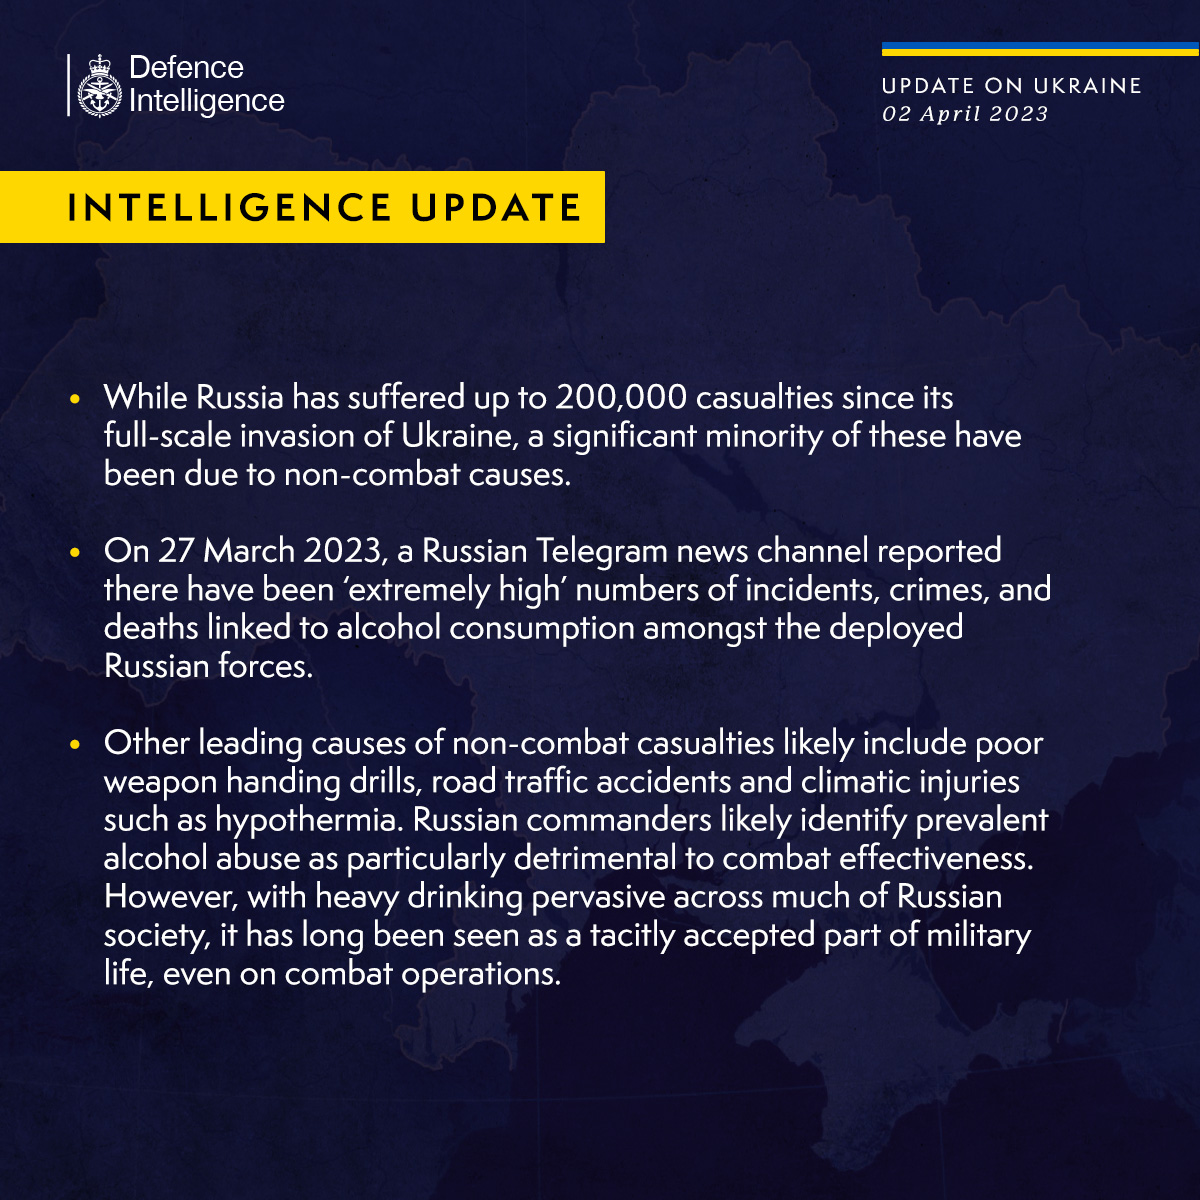 The UK Defense Intelligence Says Alcohol Consumption Among Leading Causes of russia’s Non-Combat Casualties, Defense Express